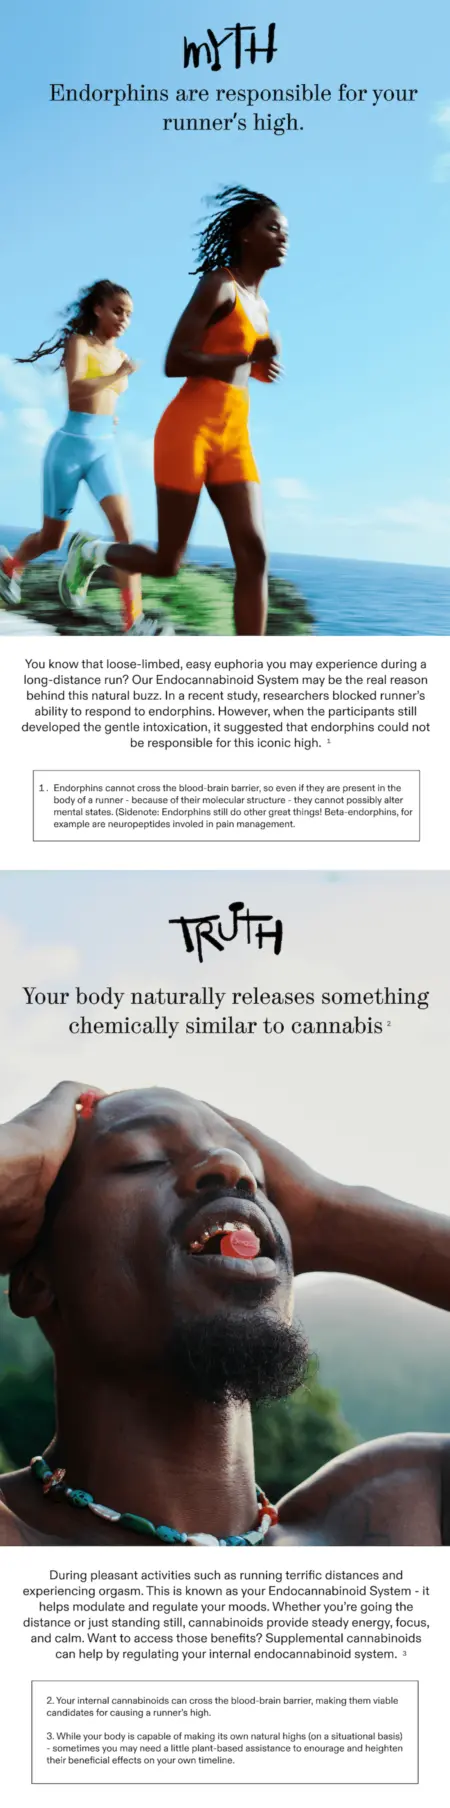 Image shows an email newsletter from CBD brand Joggy, separated vertically into two halves. The top half, labeled “Myth: Endorphins are responsible for your runner’s high,” features an image of two people running on the beach against a clear blue sky. The body copy discusses research findings suggesting that endorphins are unable to cross the blood-brain barrier and therefore cannot cause the runner’s high. The bottom half, labeled “Truth: Your body naturally releases something chemically similar to cannabis,” features a close-up image of someone holding a gummy between their teeth, with their eyes closed and head lifted upward contentedly. The body copy explains how the human endocannabinoid system helps modulate and regulate moods, especially during pleasant activities.